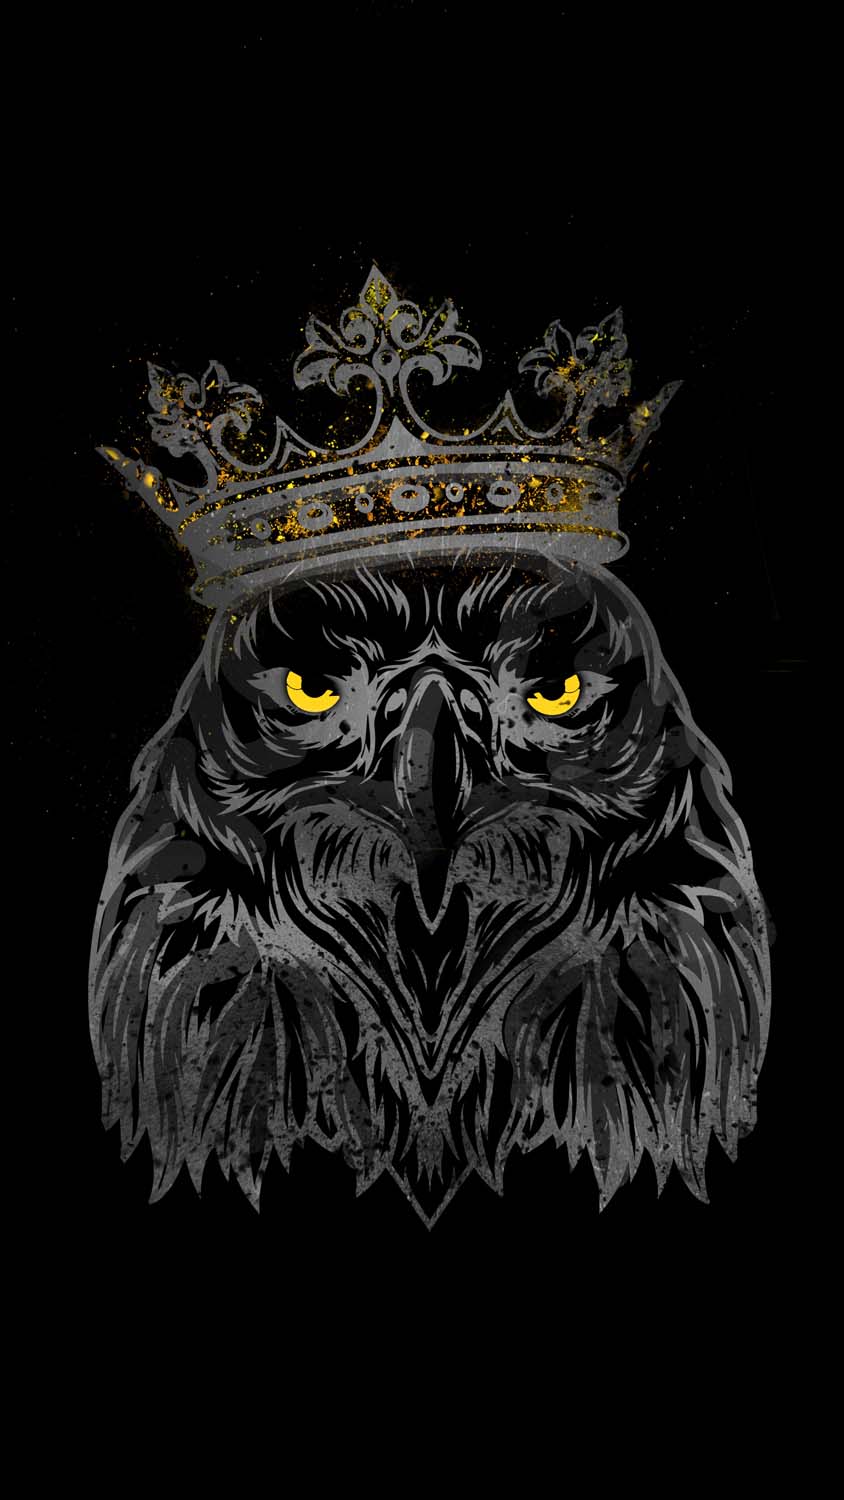 King Eagle IPhone Wallpaper HD - IPhone Wallpapers : iPhone Wallpapers